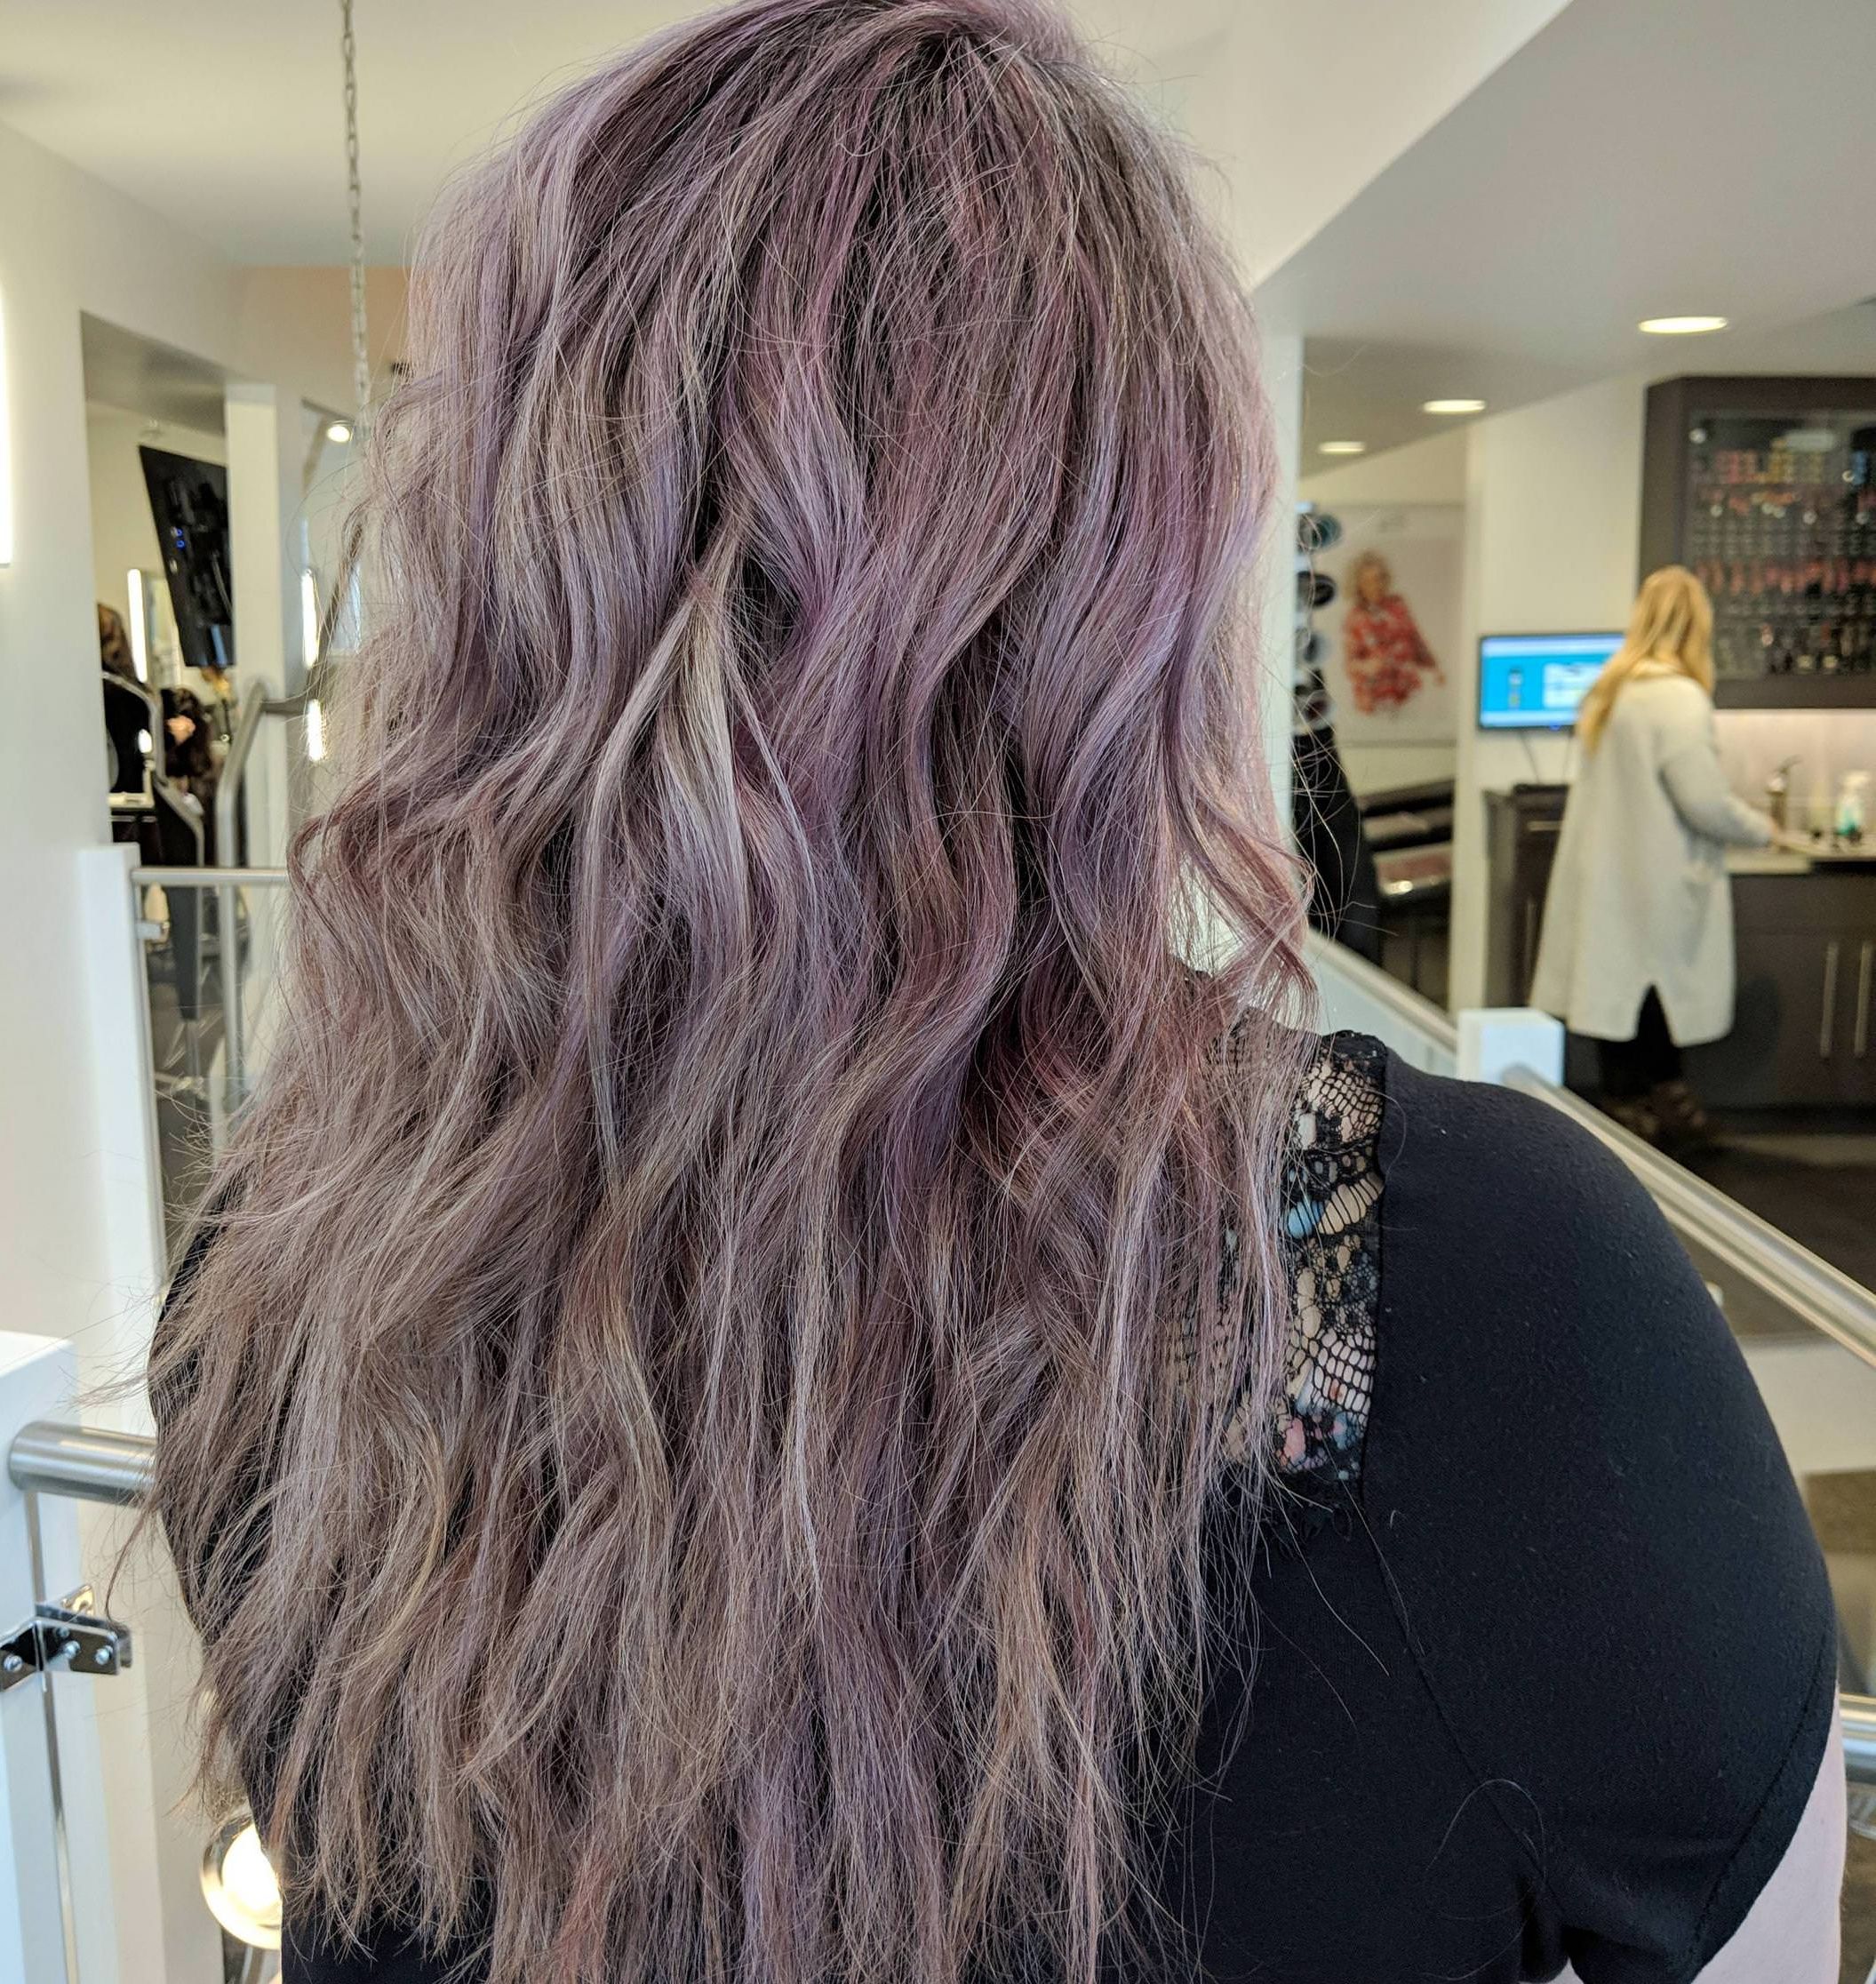 Dusty Lavender Yes Please – Imgur With Regard To Dusty Lavender Short Shag Haircuts (View 6 of 20)